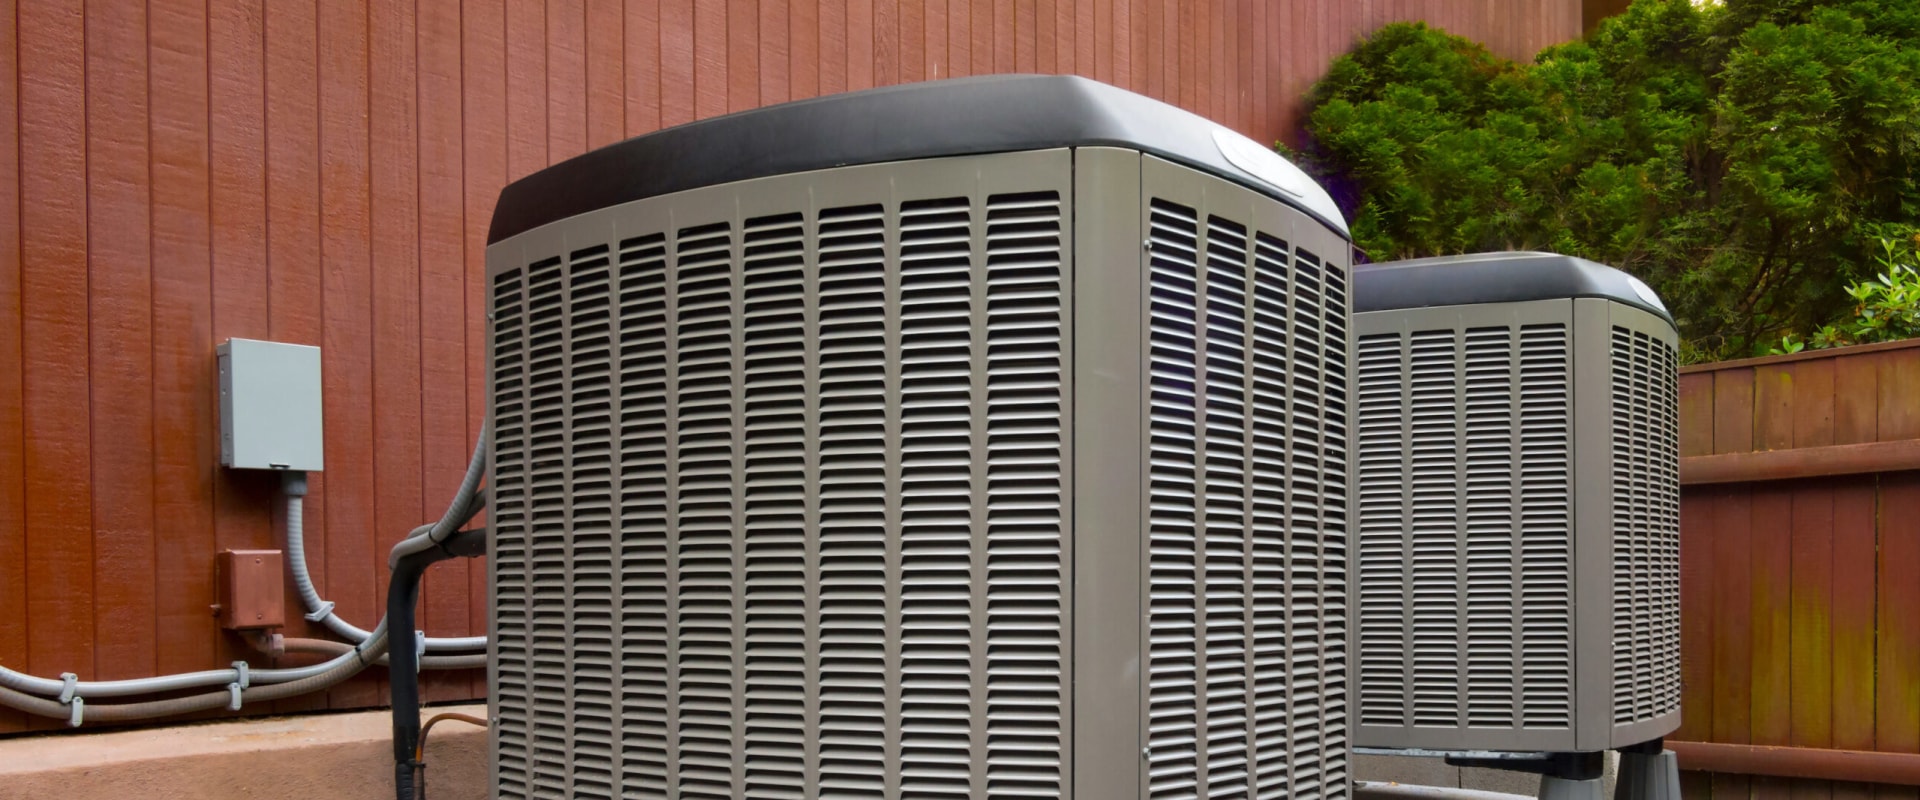 The Top Air Conditioner Brands to Consider in 2023